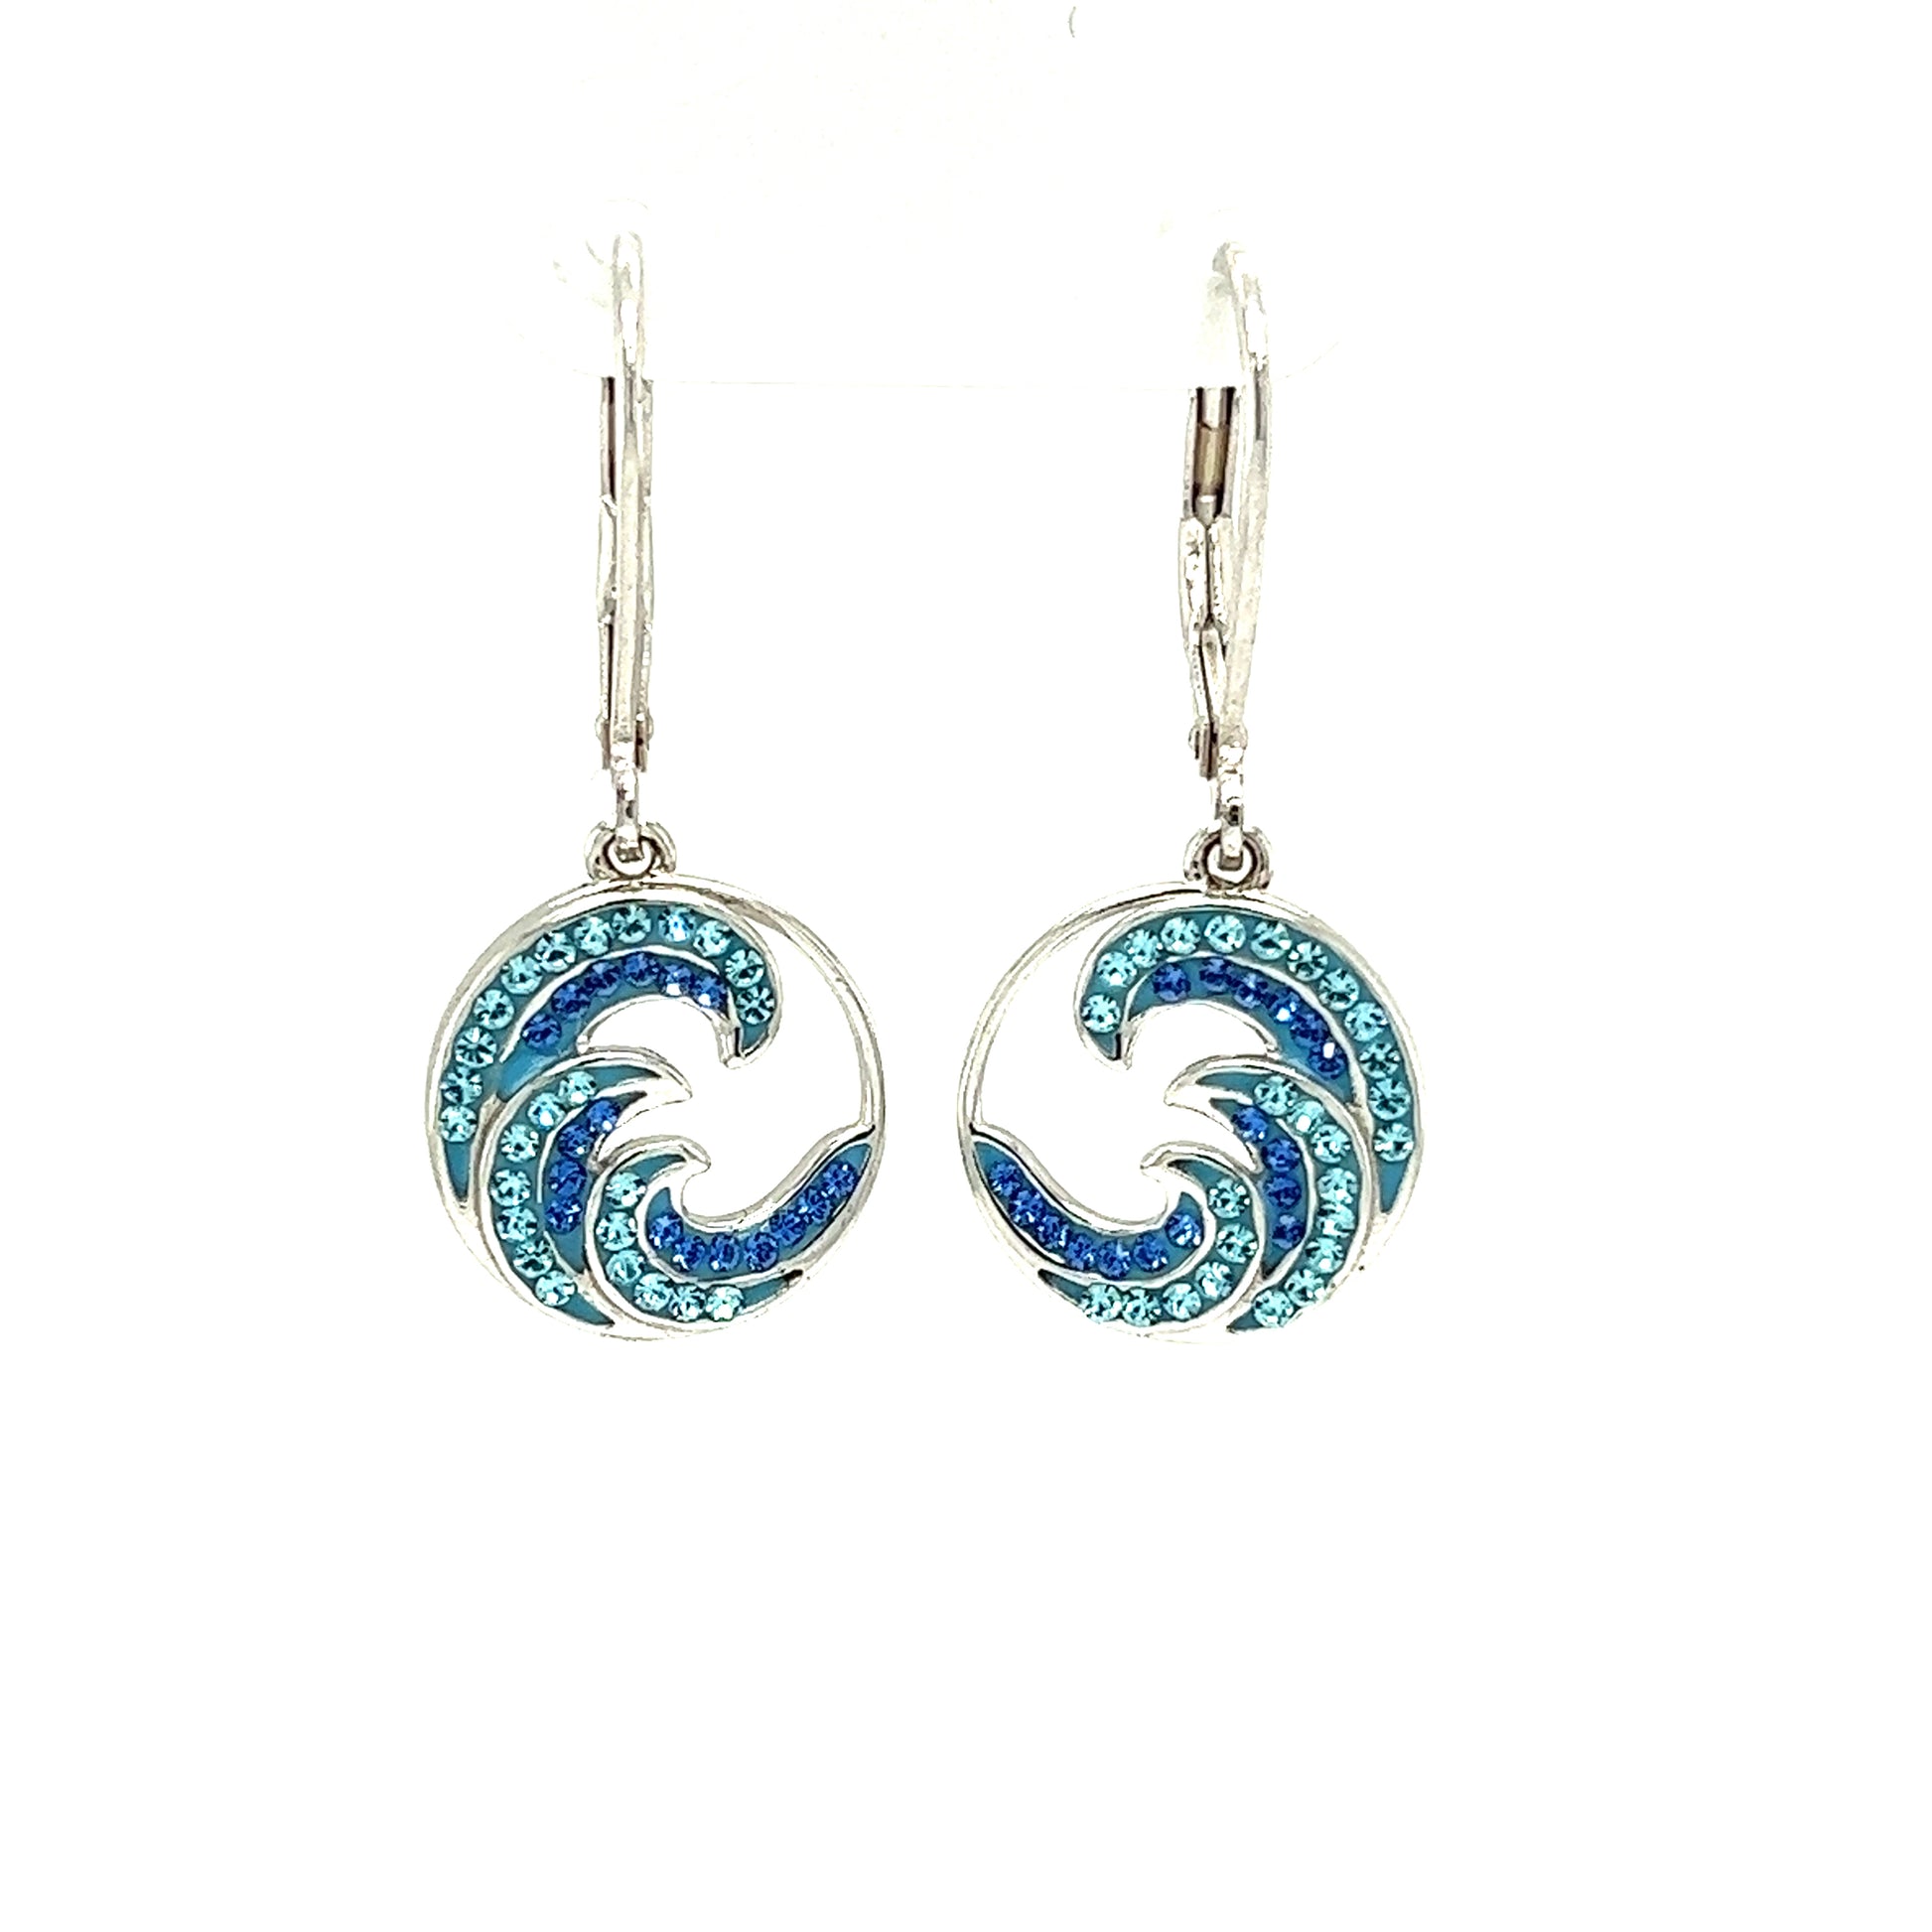 Wave Dangle Earrings with Blue and Aqua Crystals in Sterling Silver Front View